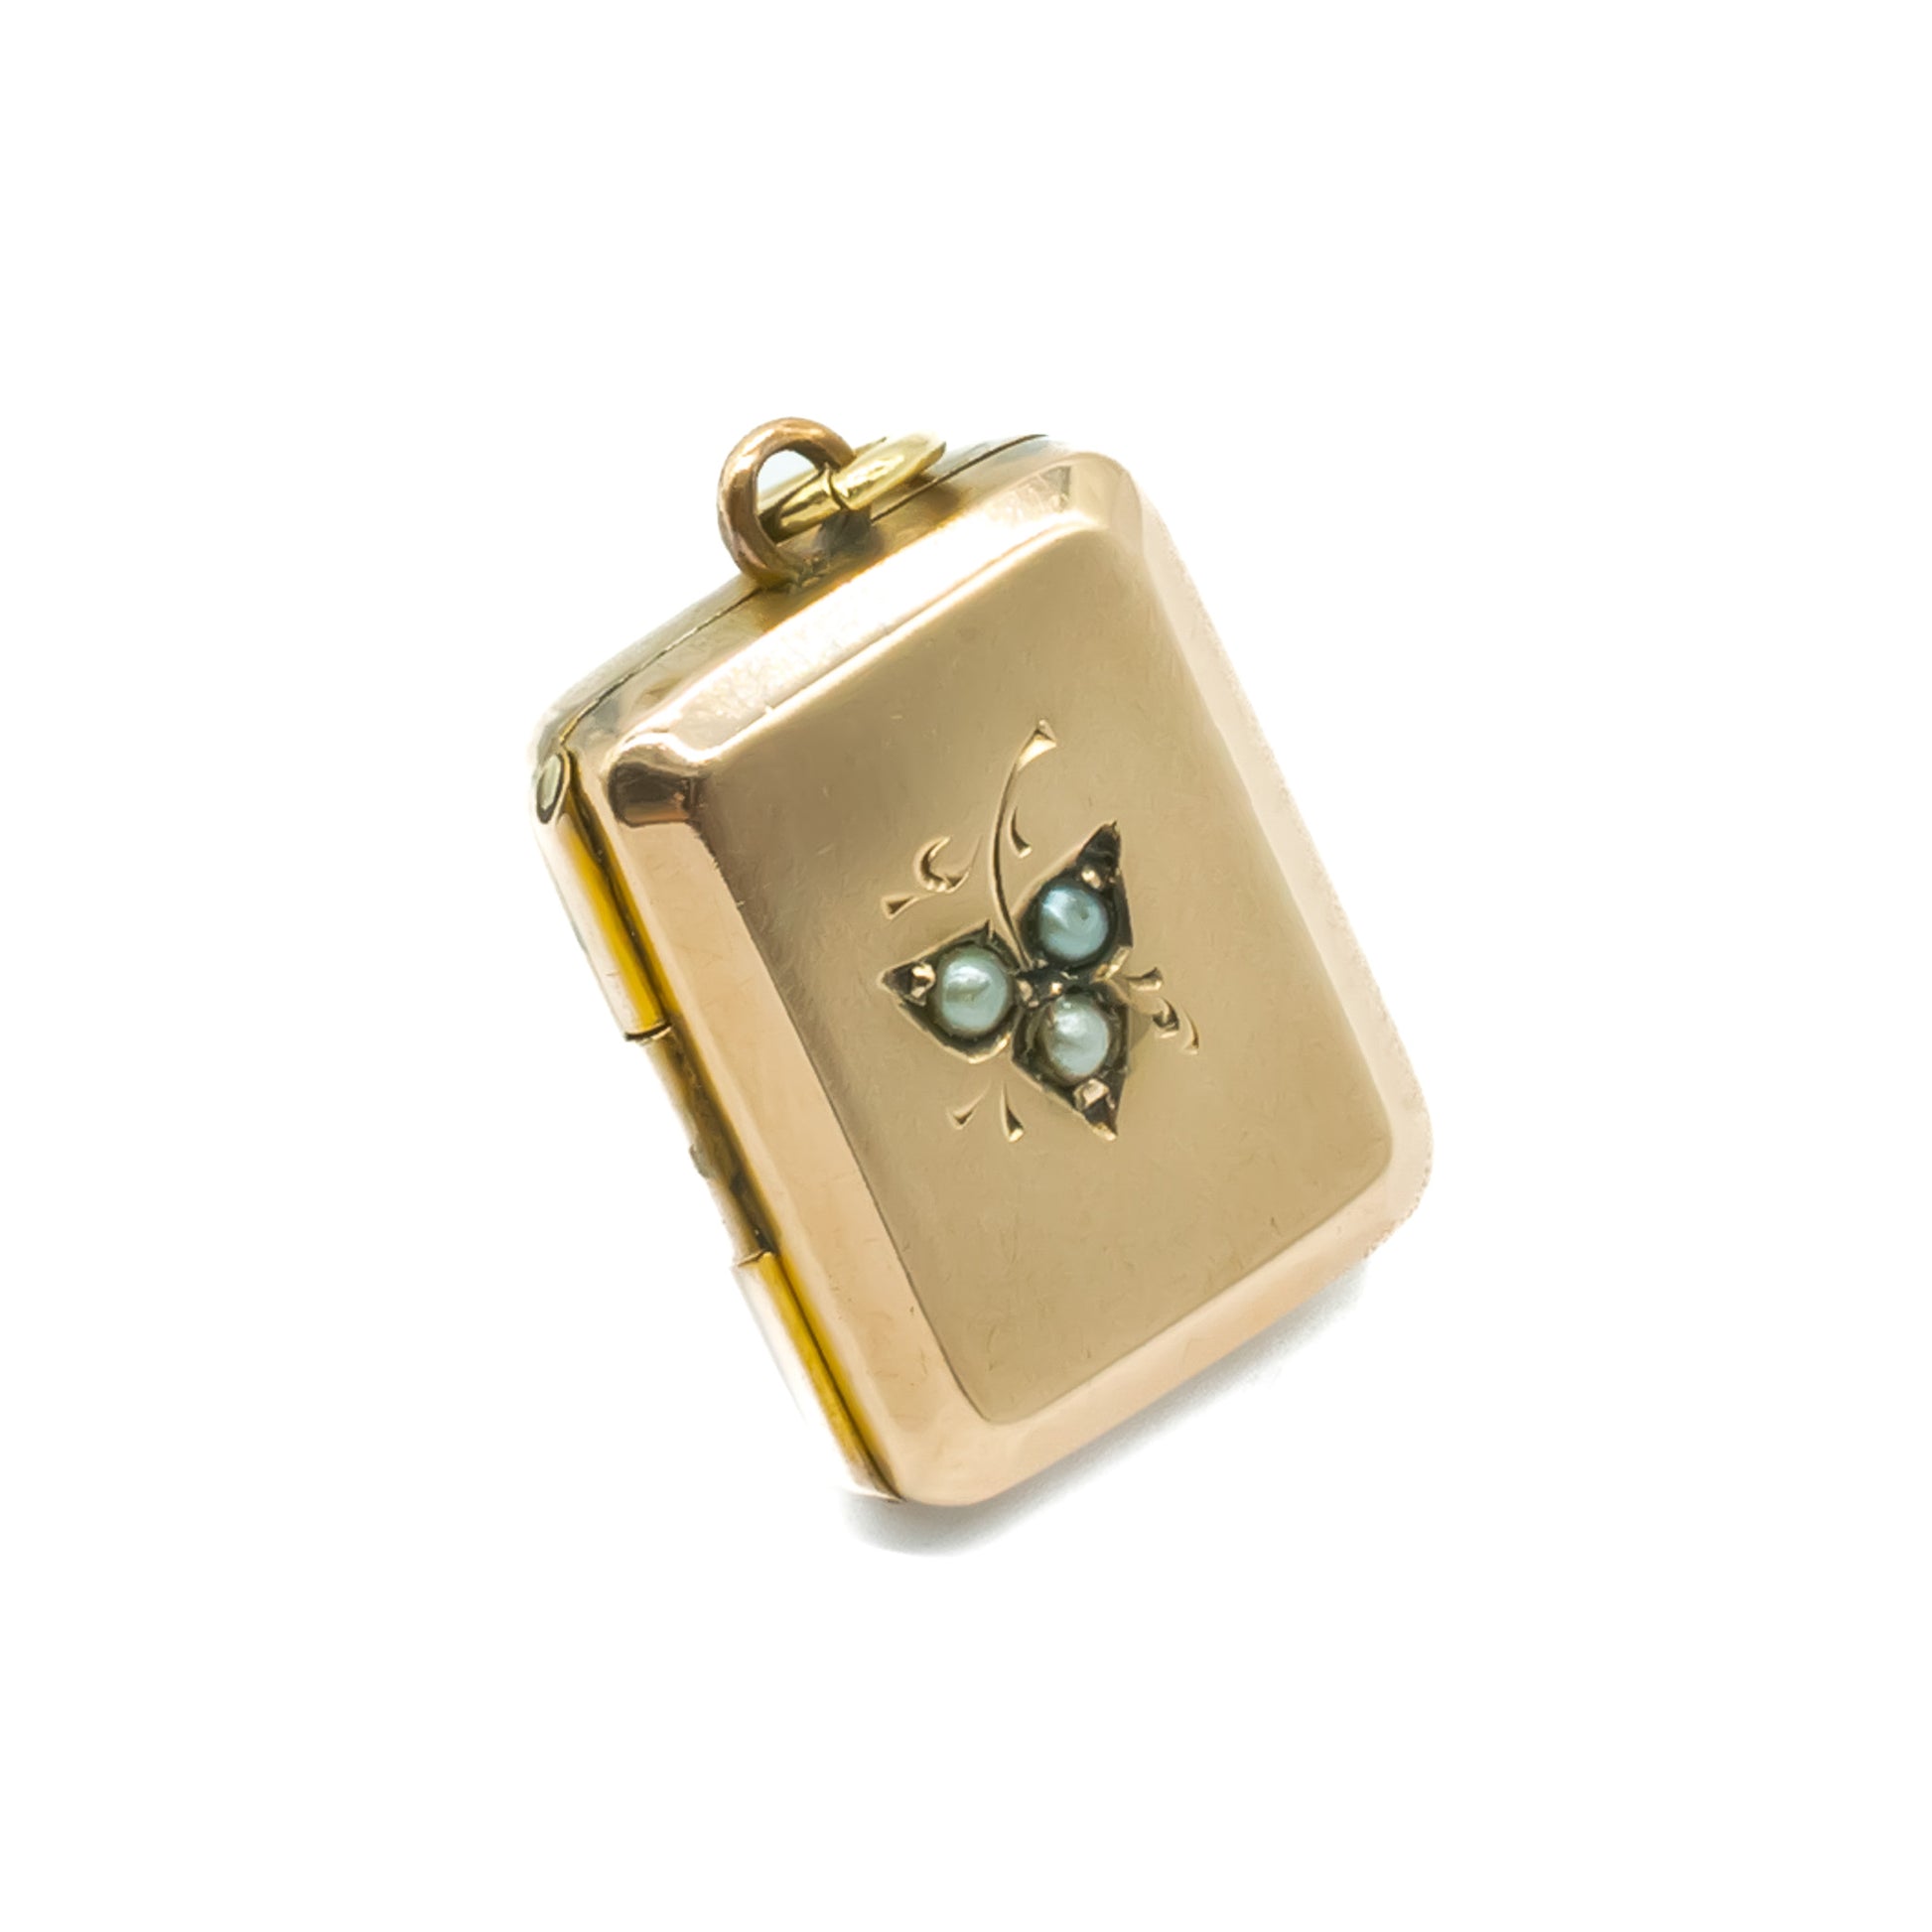 Charming Victorian 9ct rose gold-cased locket set with three seed pearls within a fine leaf engraving.